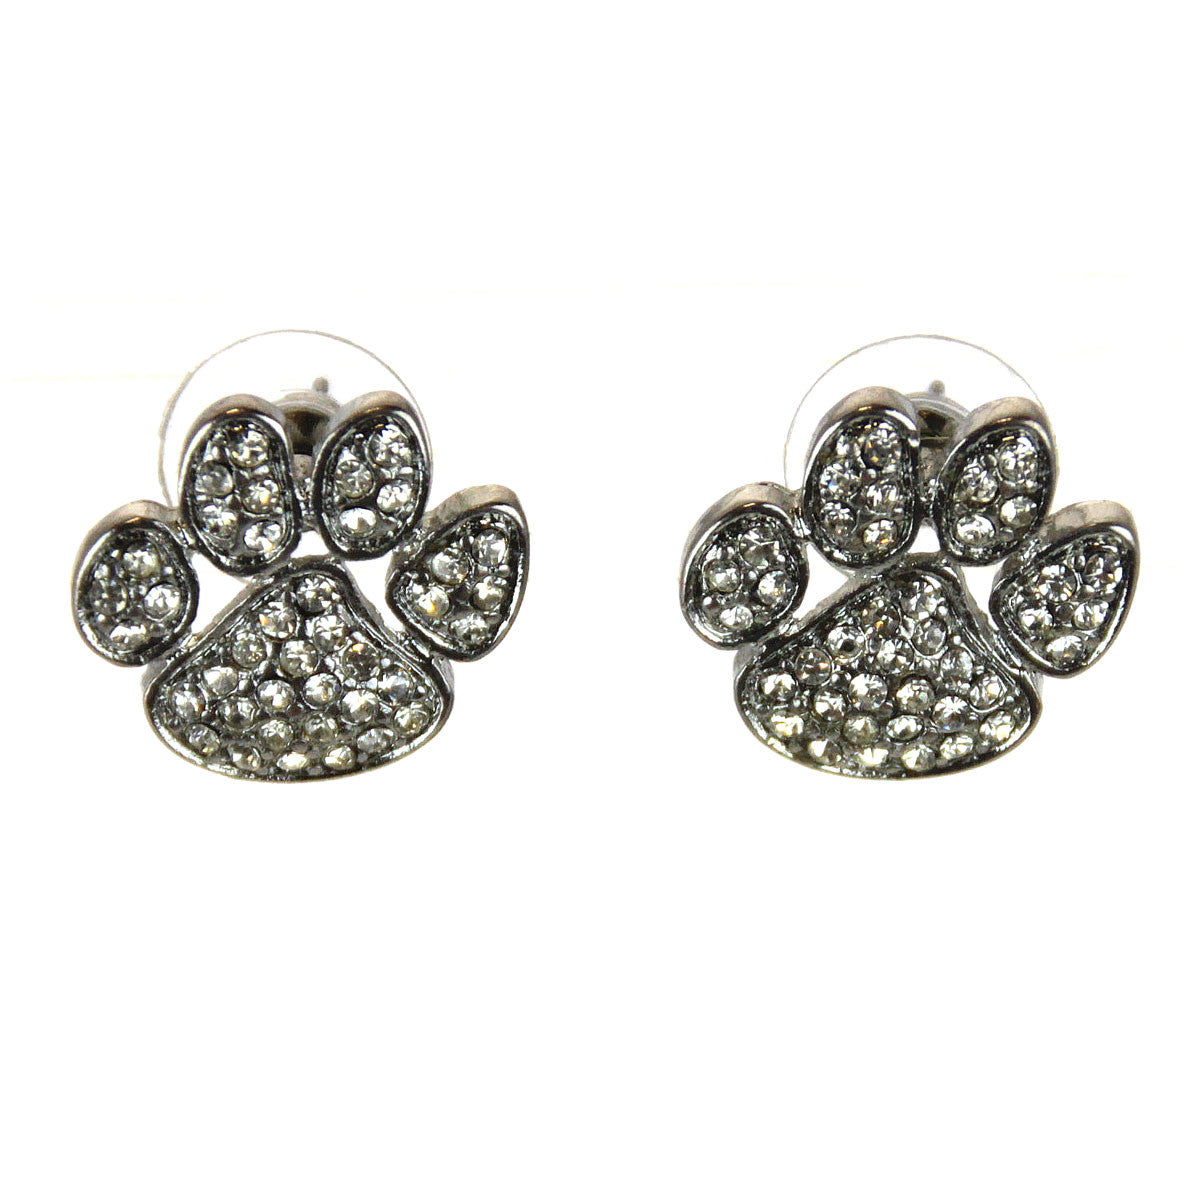 Tiger Paw Silver Earrings Crystals